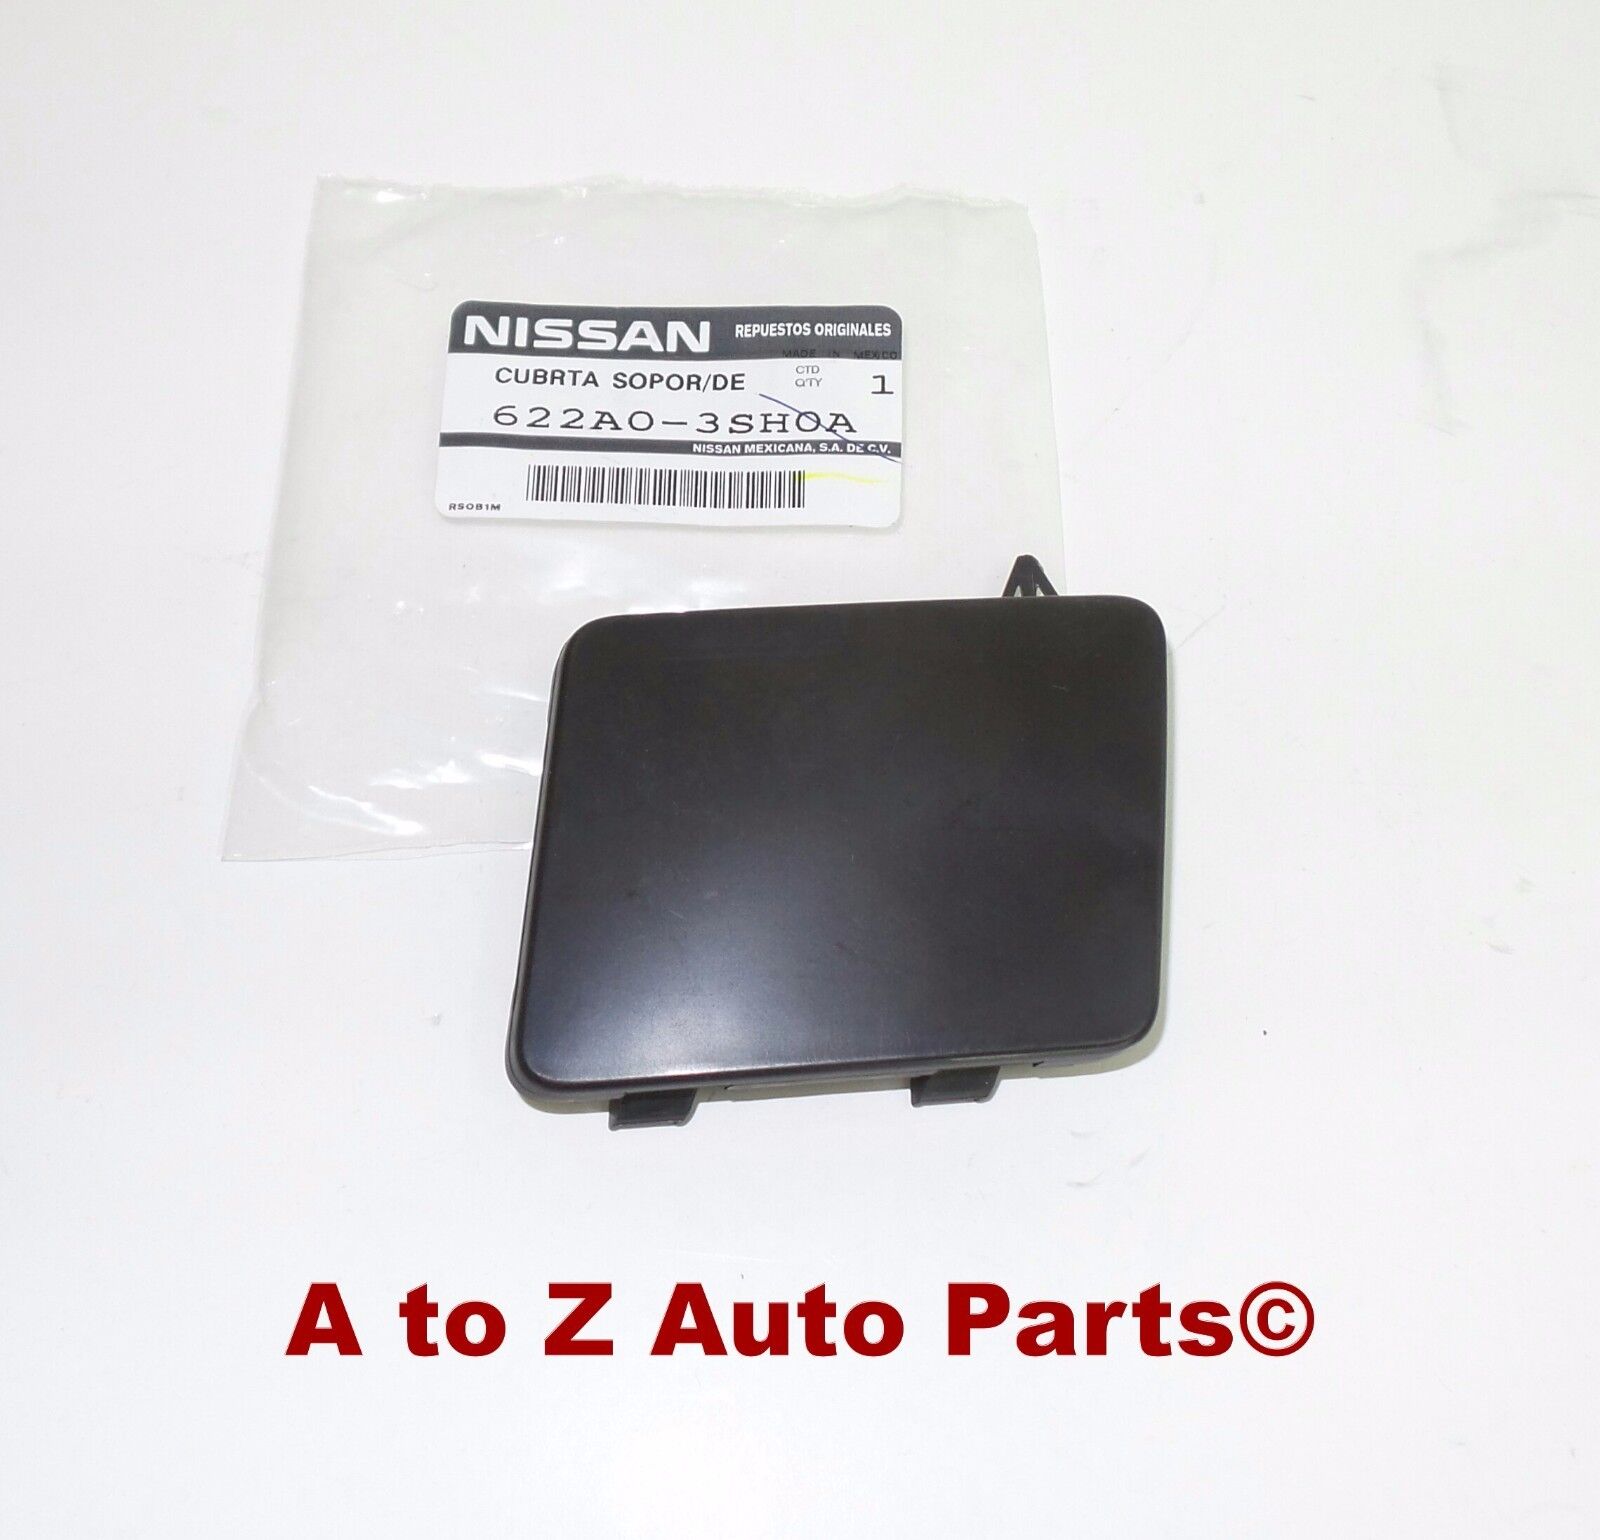 NEW 2013-2015 Nissan Sentra Front Bumper Tow Eye Hook Access Cover Cap, OEM